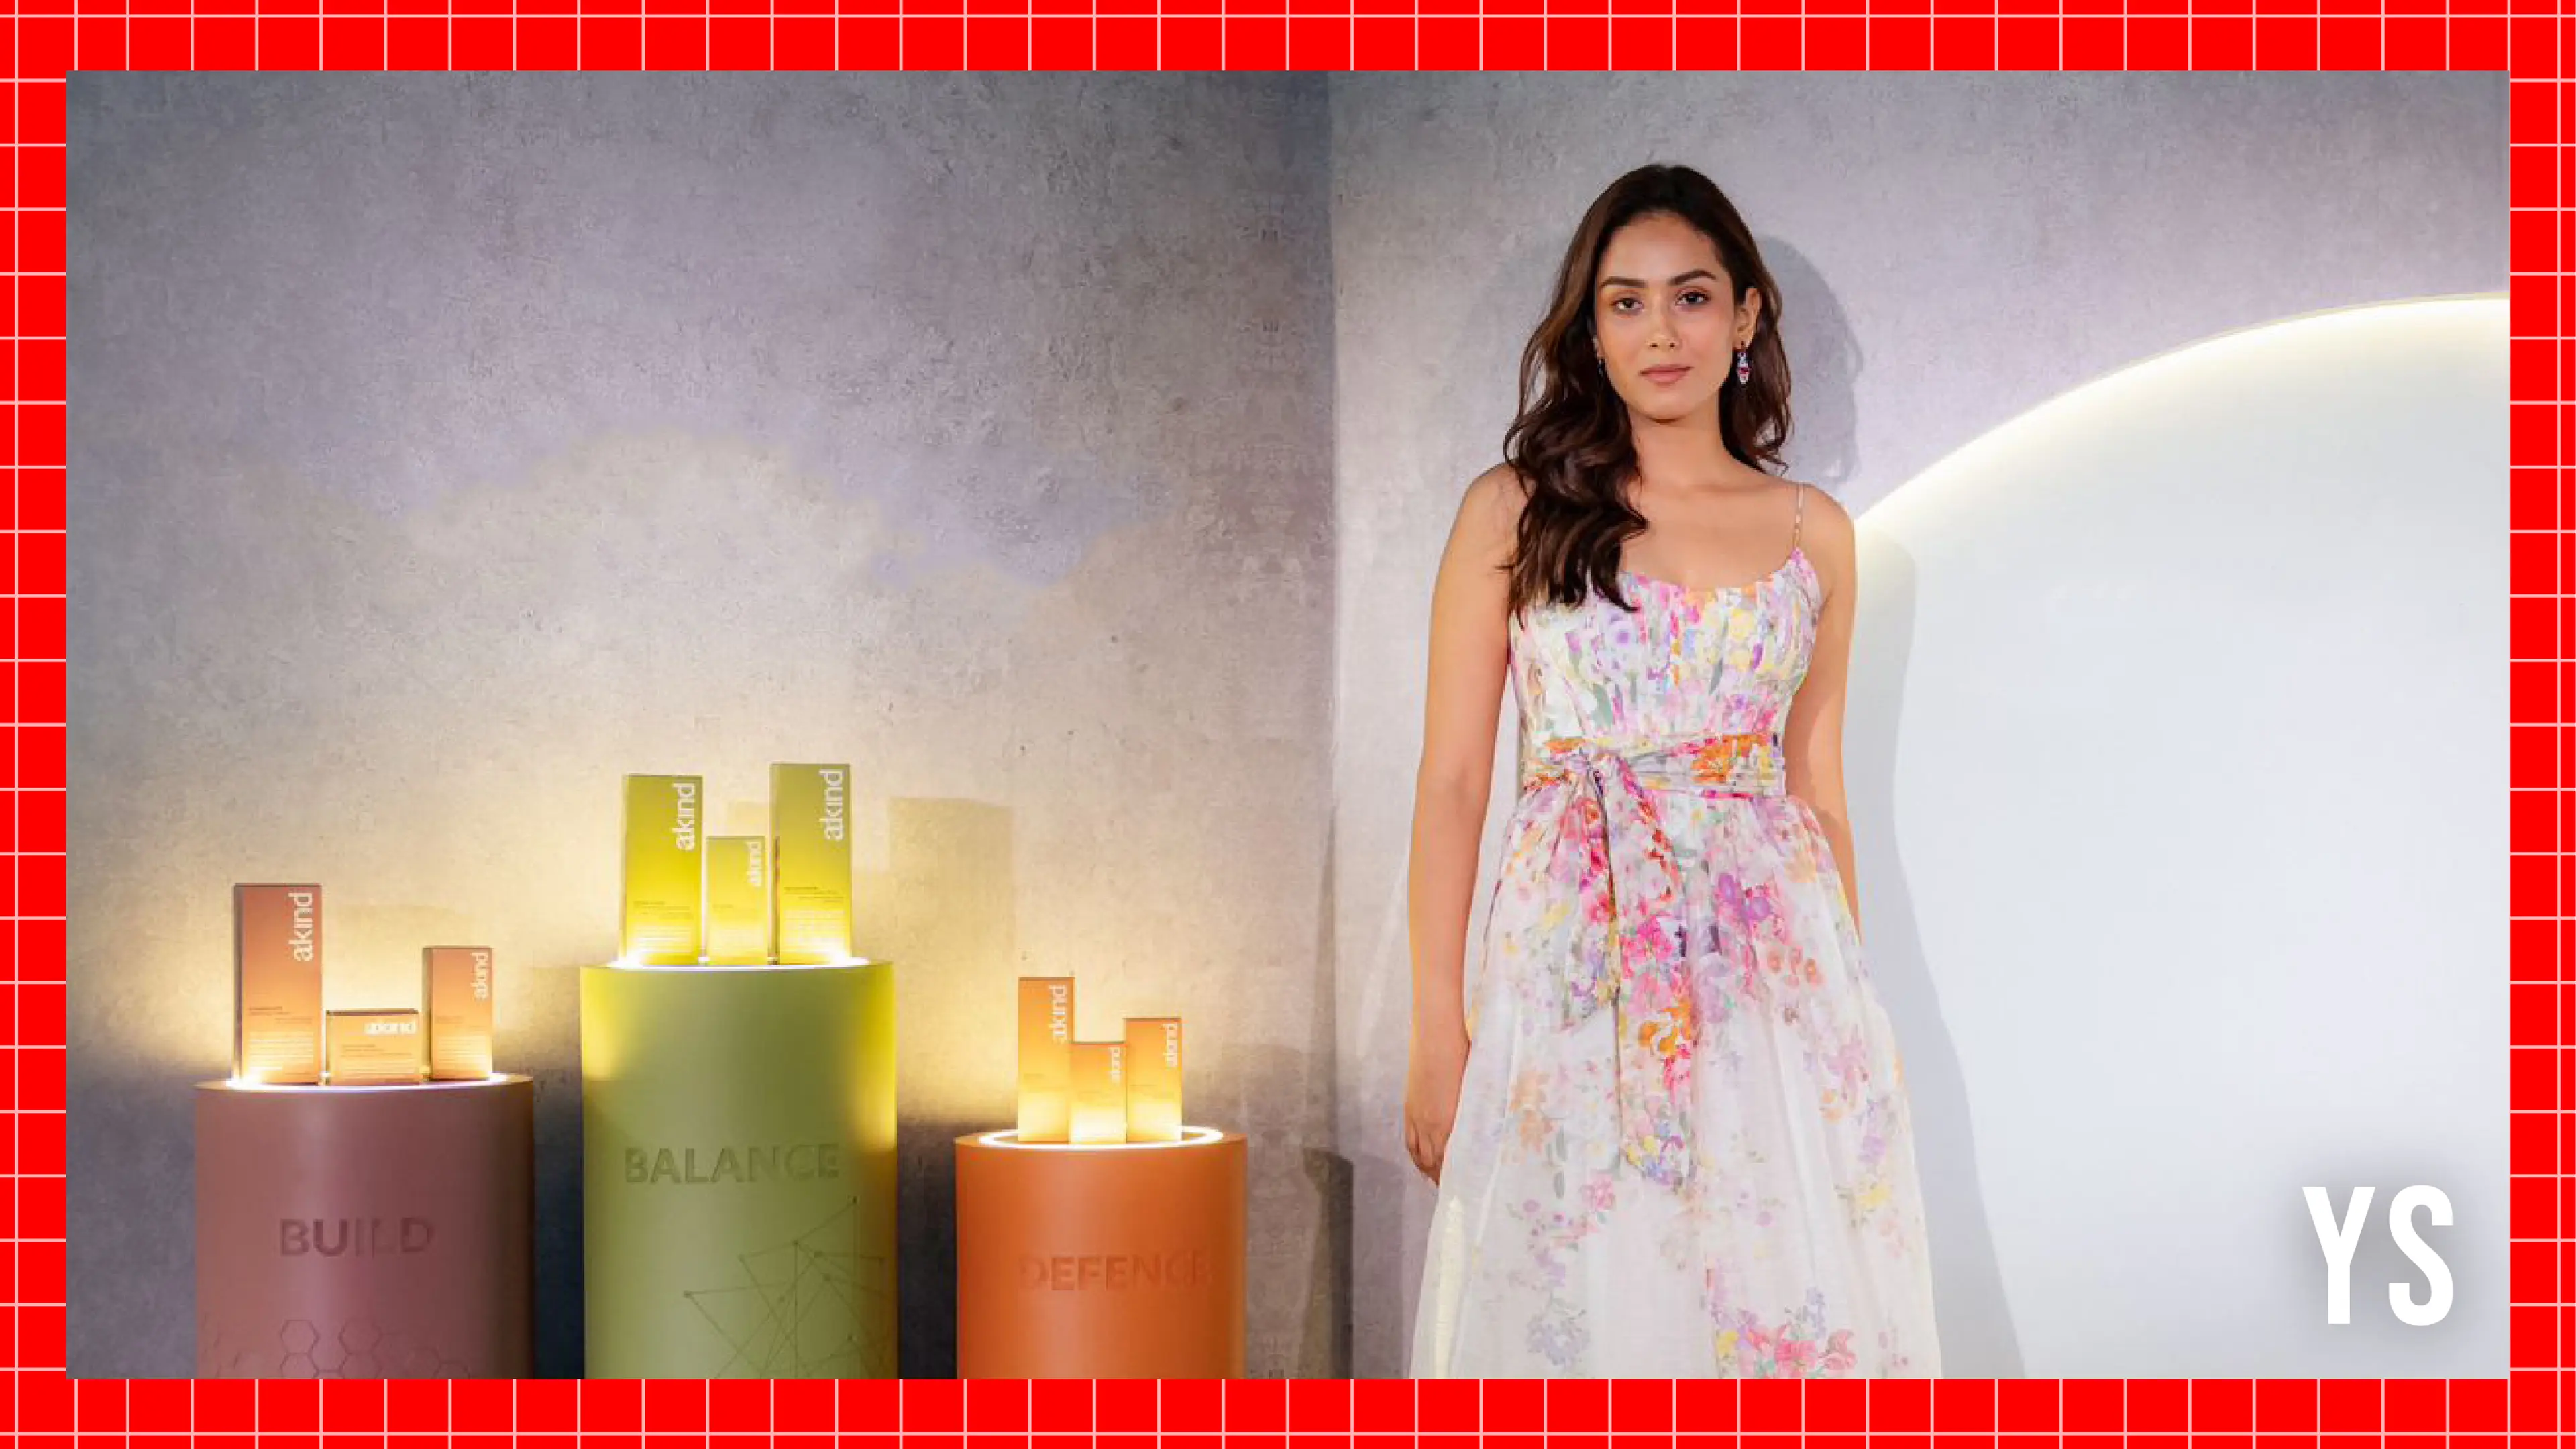 Skincare as self-care can be taught early, says Mira Kapoor on launching Akind